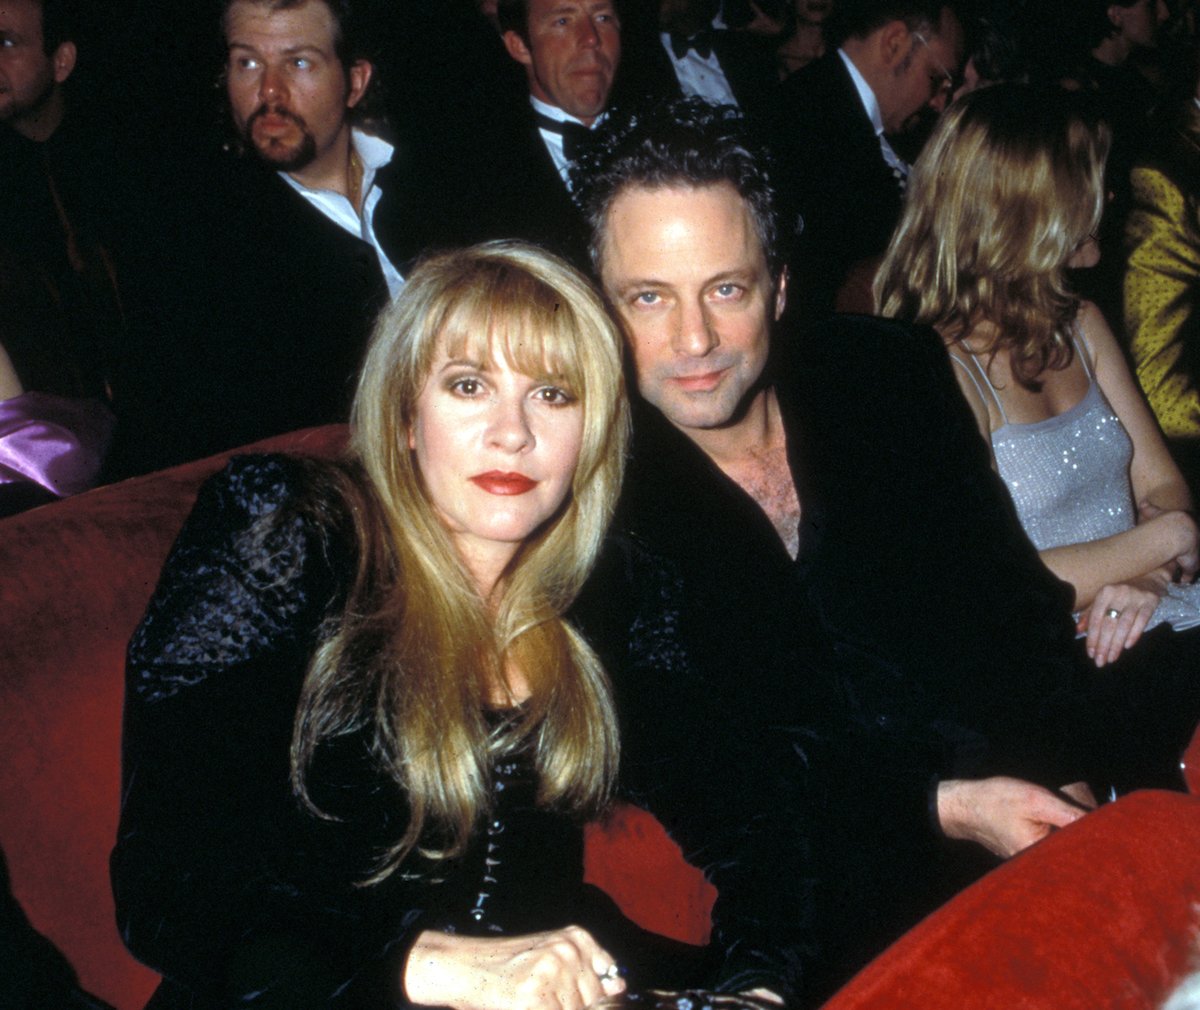 Stevie Nicks and Lindsey Buckingham, who shared a "movie moment."